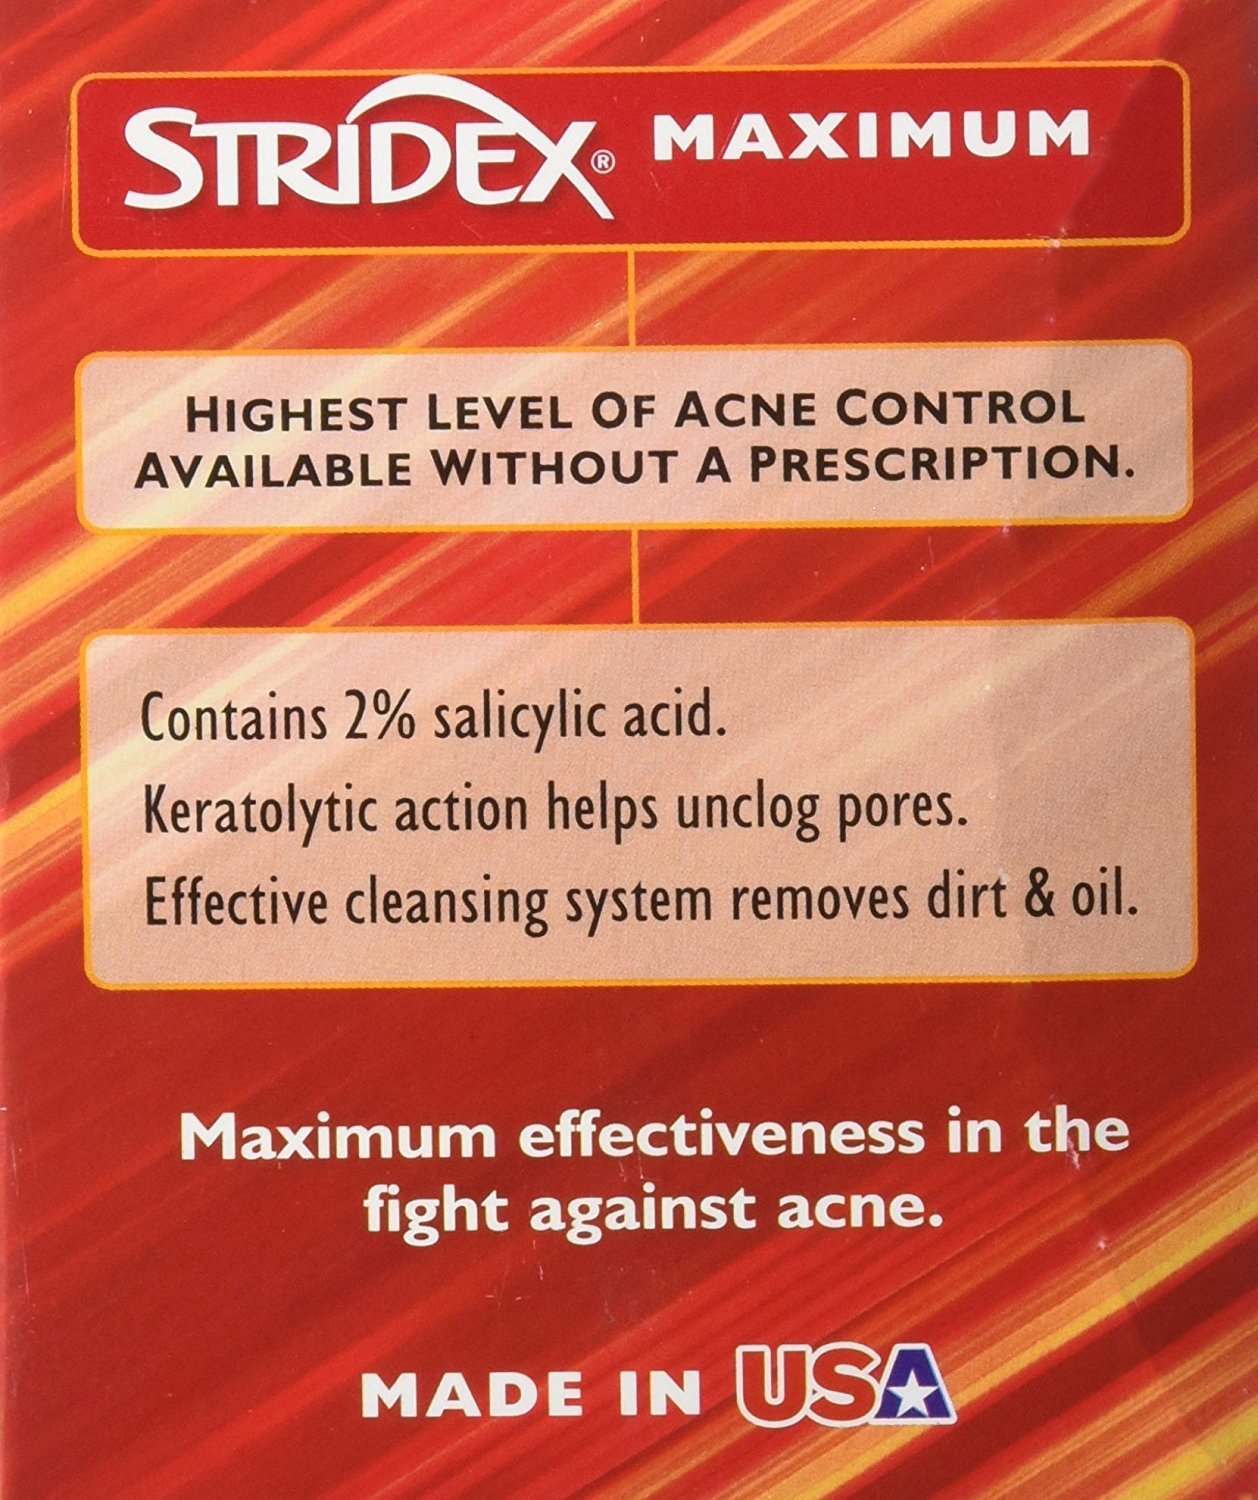 Stridex Med Pads Size 90ct - image 5 of 11